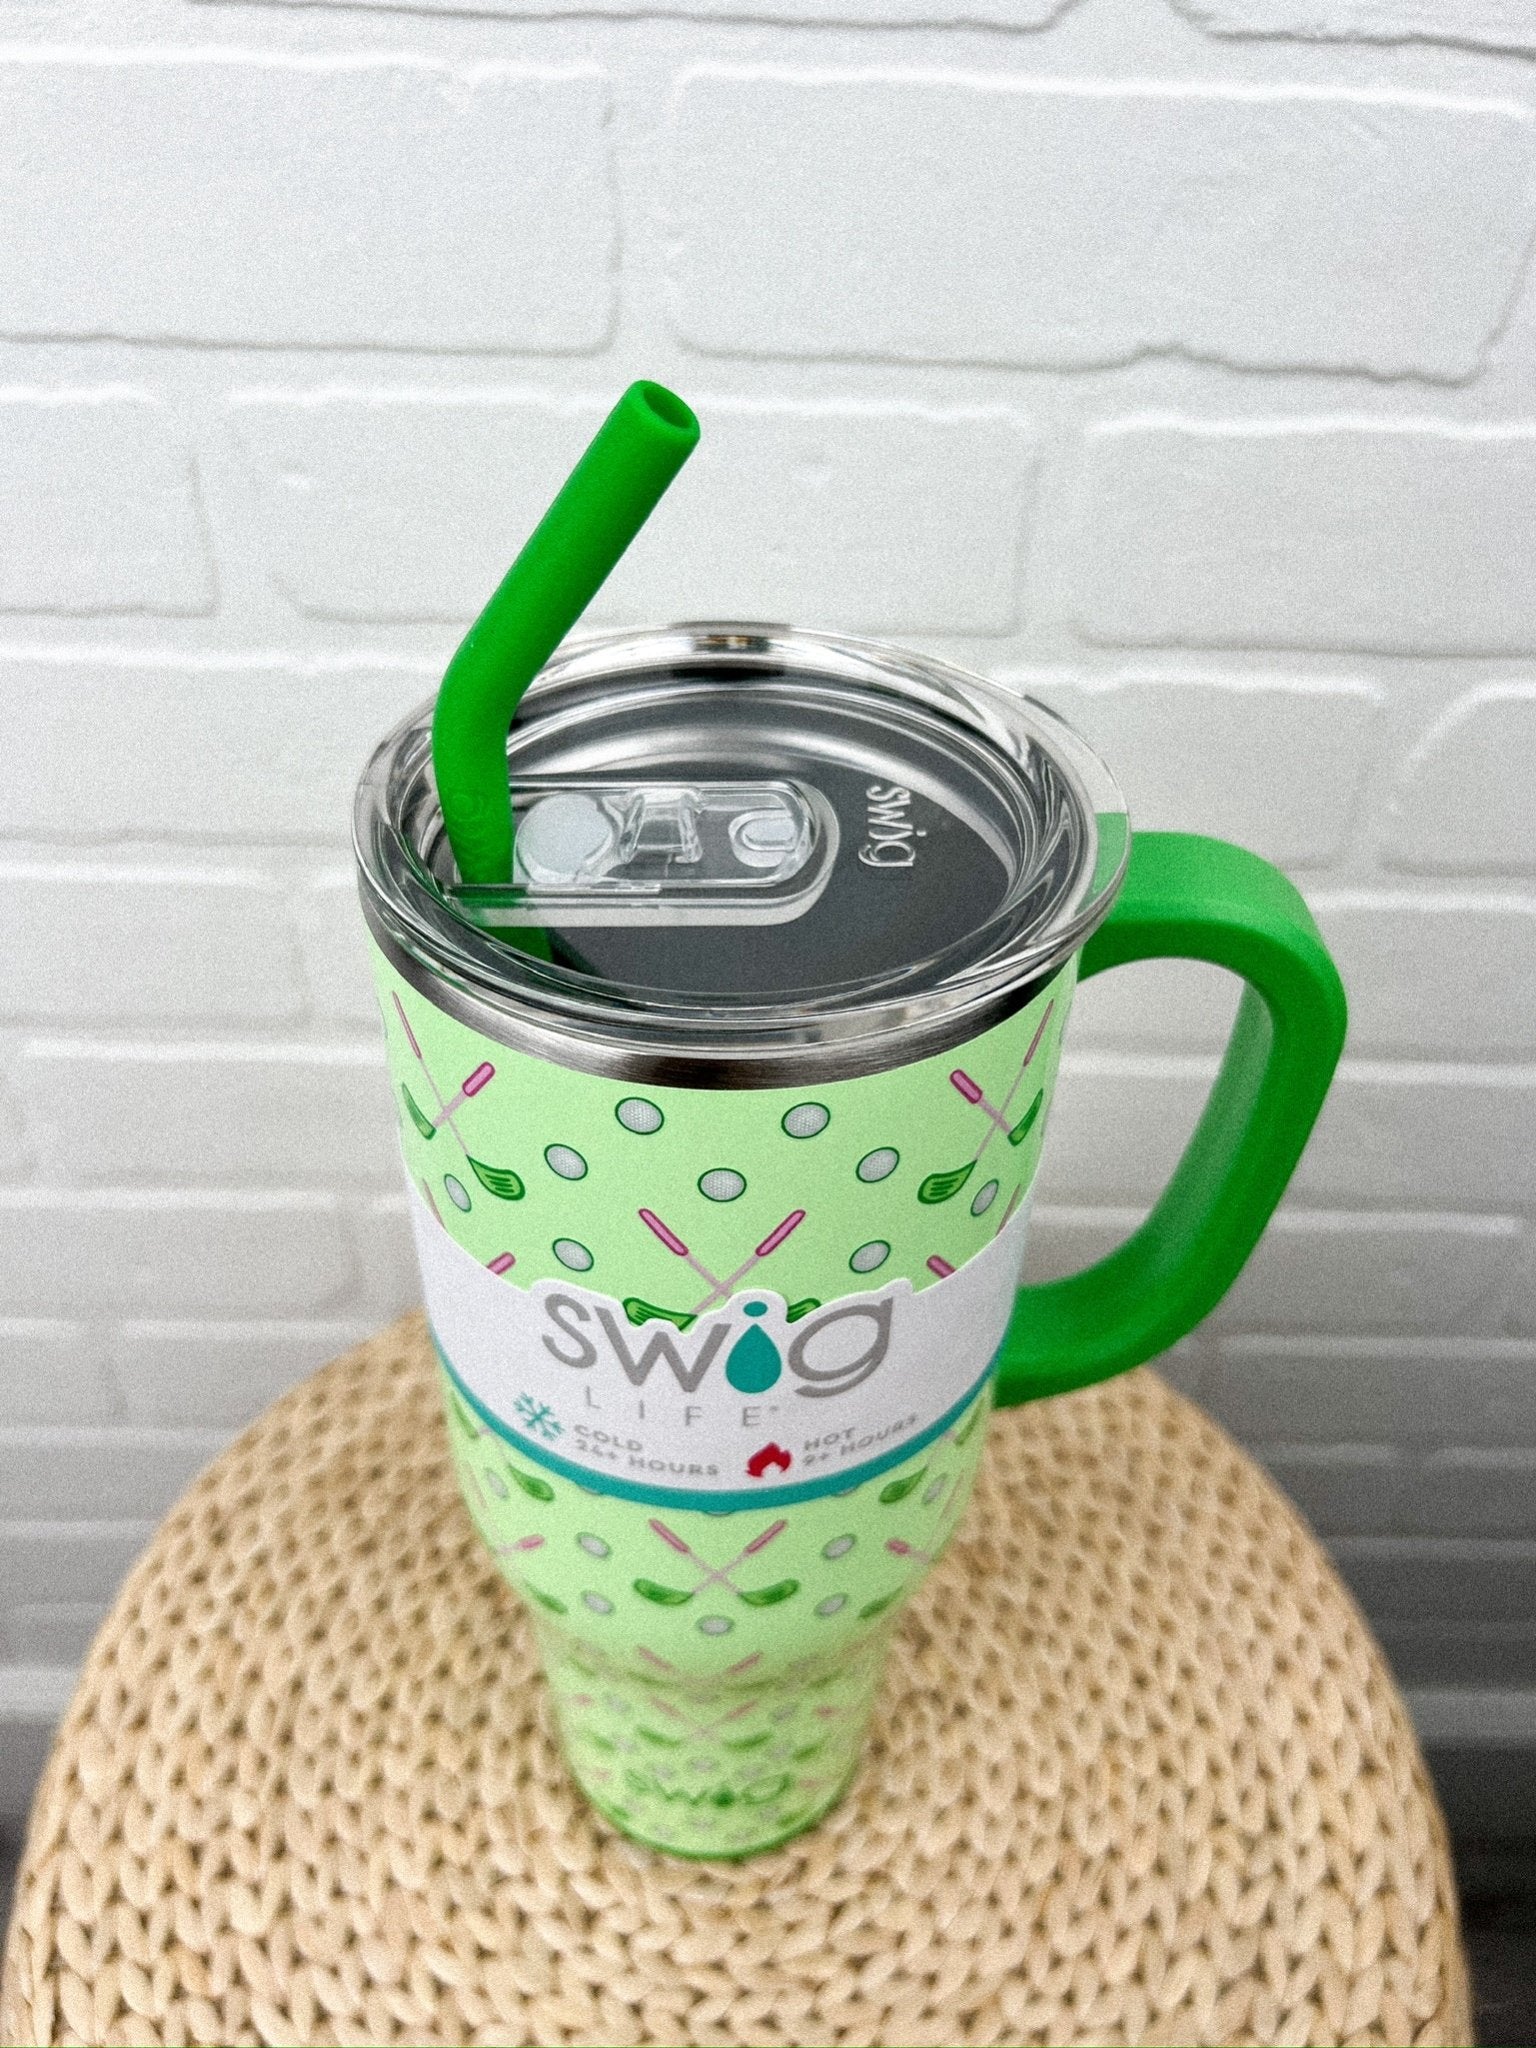 Swig Tee Time 40oz tumbler - Trendy Tumblers, Mugs and Cups at Lush Fashion Lounge Boutique in Oklahoma City